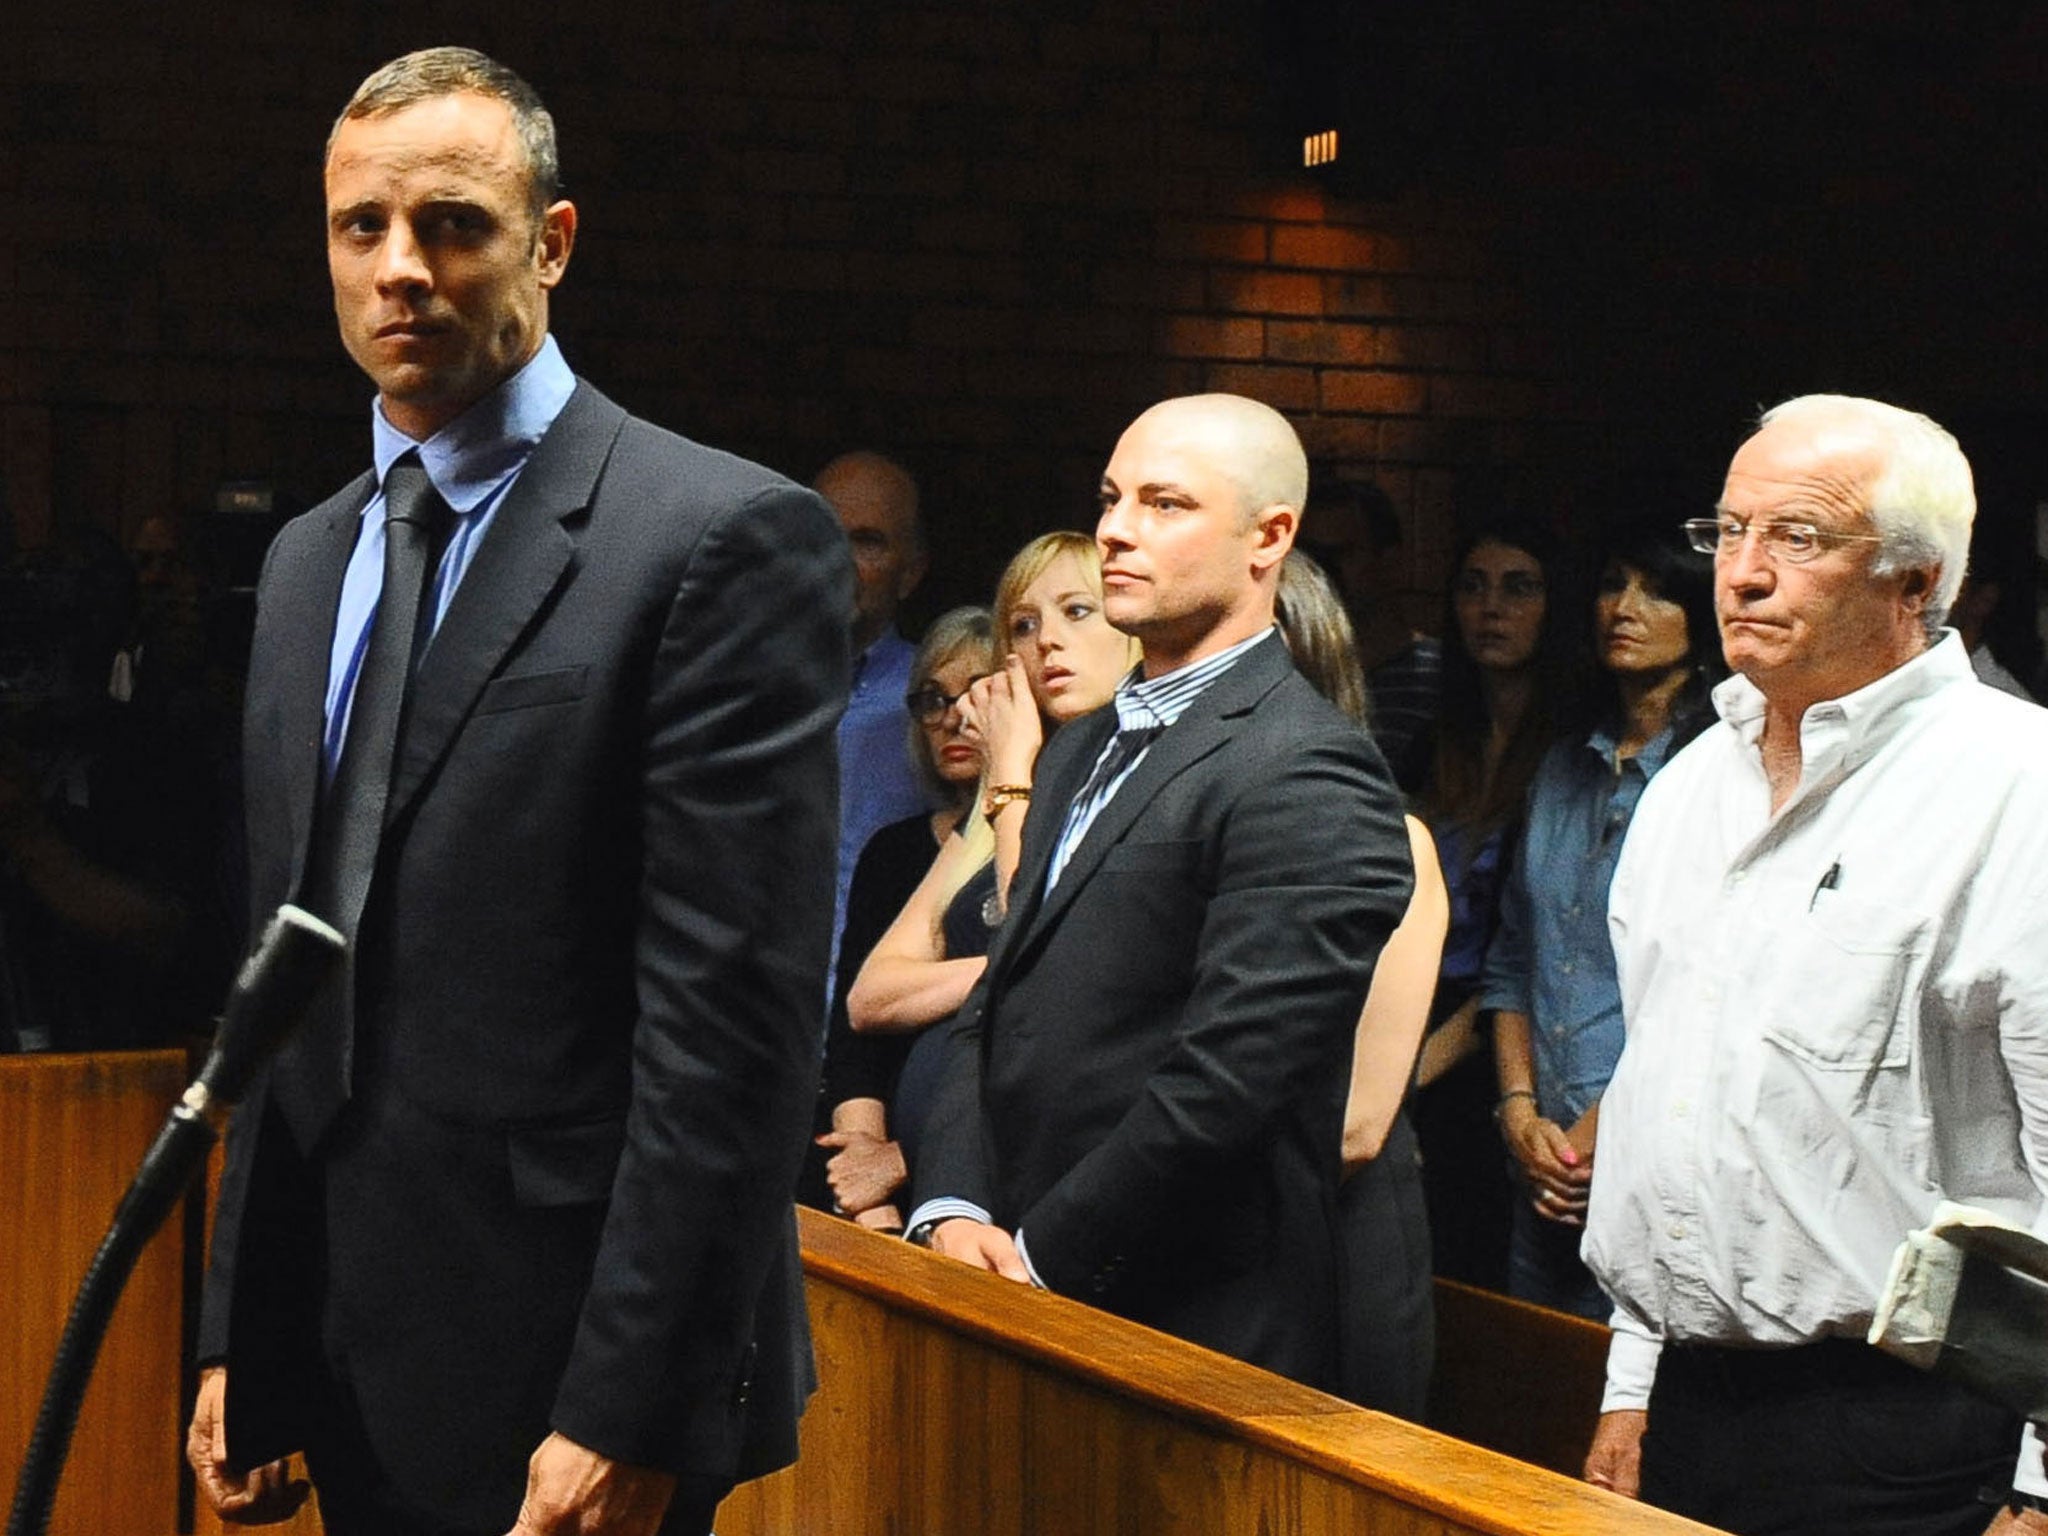 Olympian Oscar Pistorius stands following his bail hearing, as his brother Carl, centre, and father Henke look on